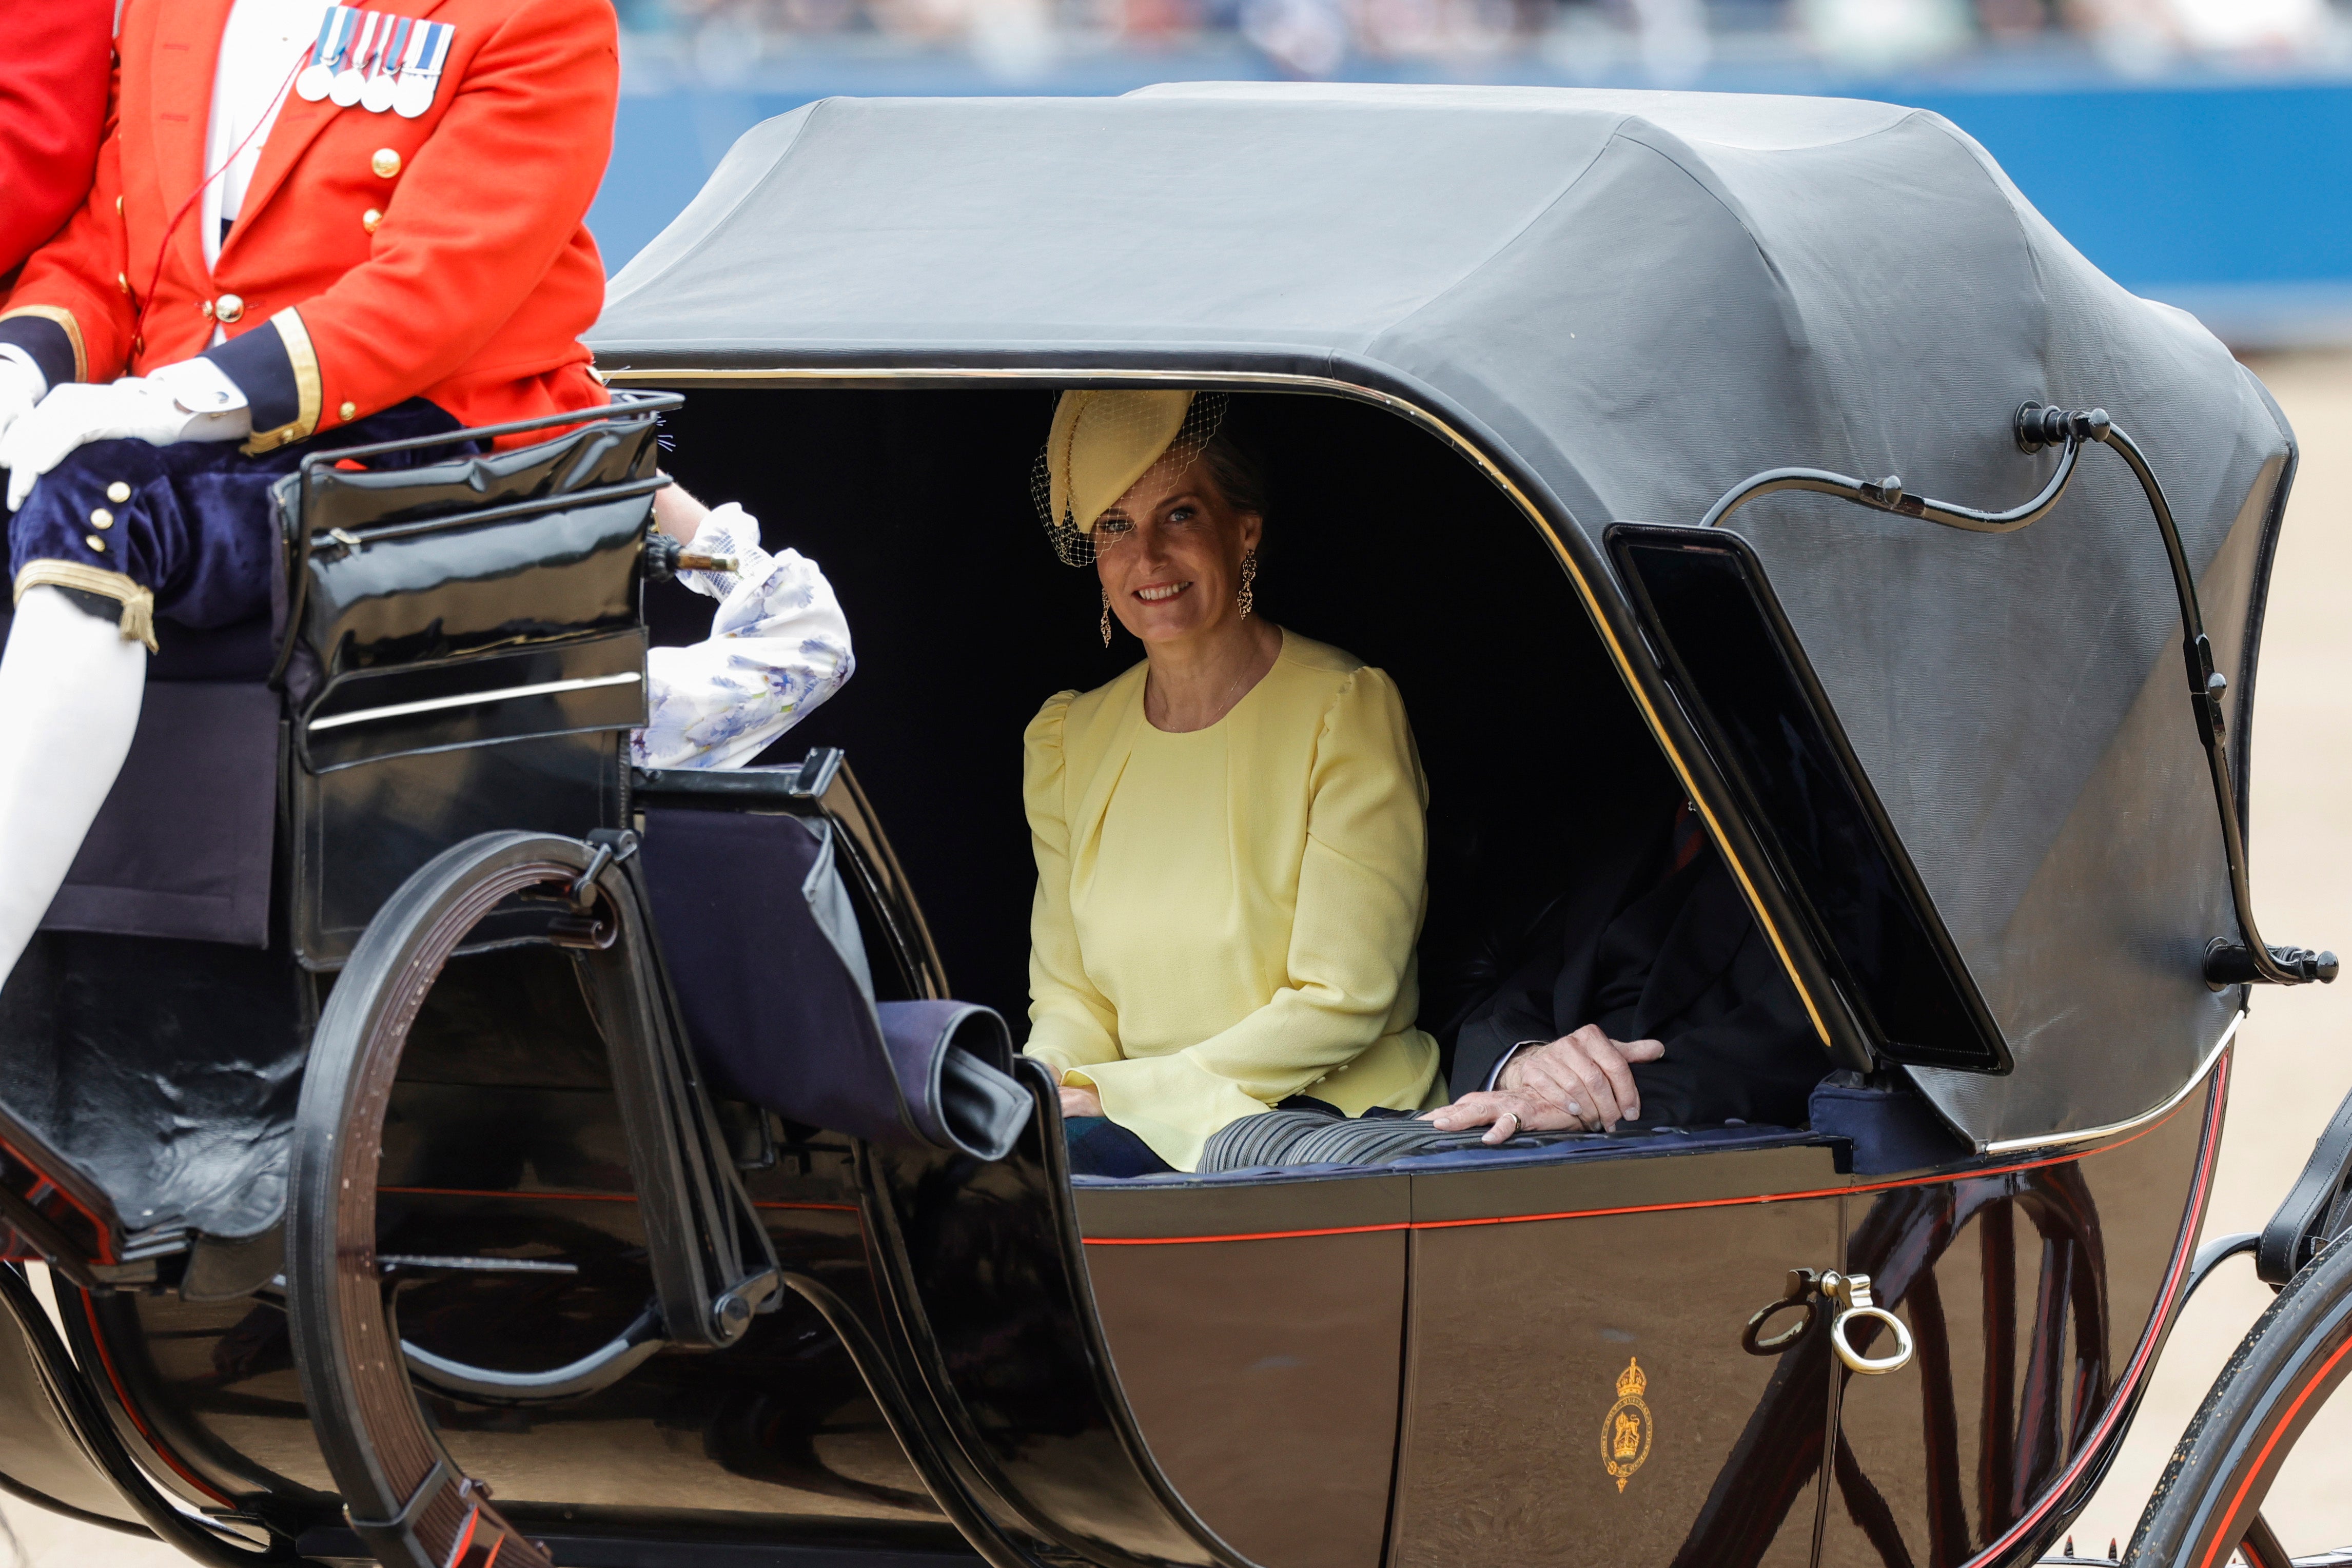 Sophie, the Duchess of Edinburgh smiling at the crowds